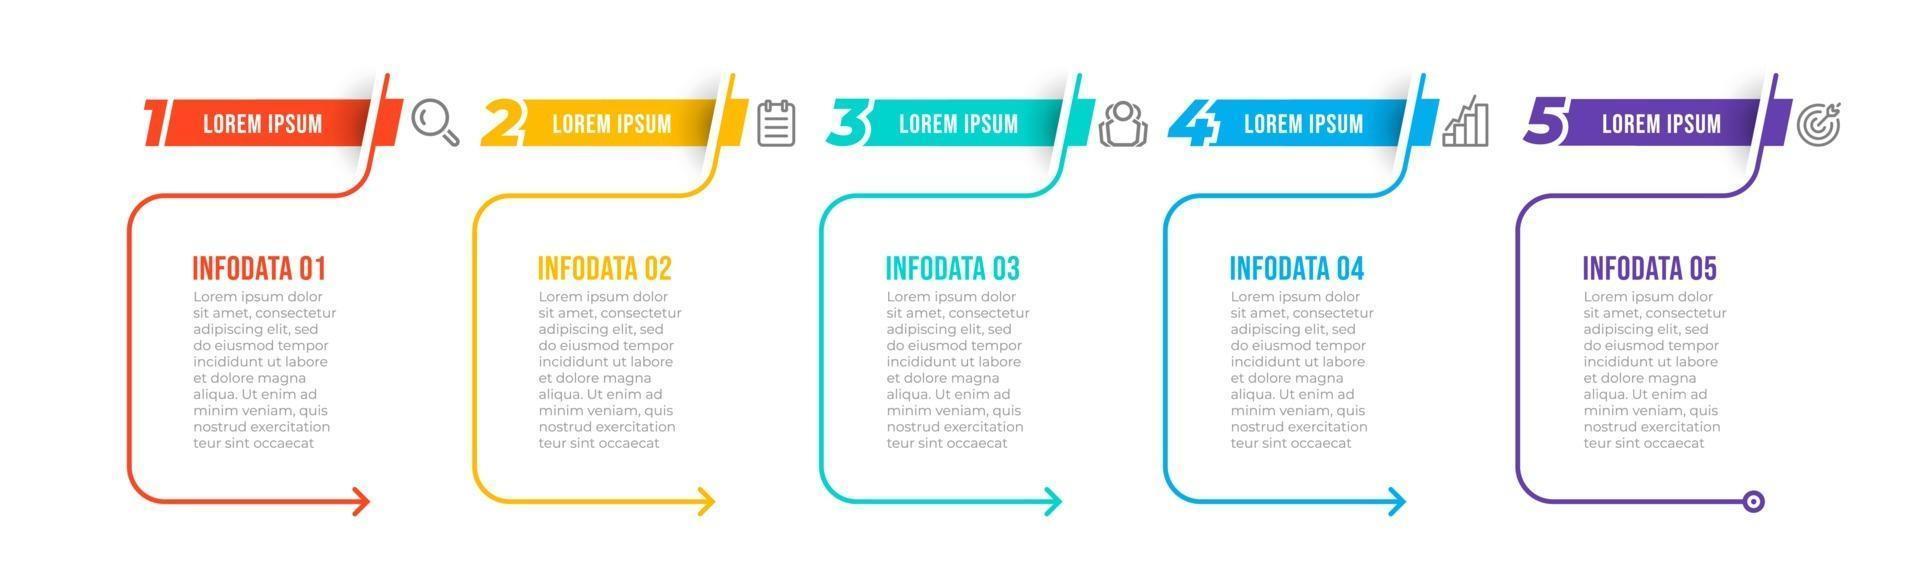 Thin line infographic design template with icons and number options. Business concept with 5 steps or processes. Can be used for presentations, workflow layout, diagram, flow chart. vector